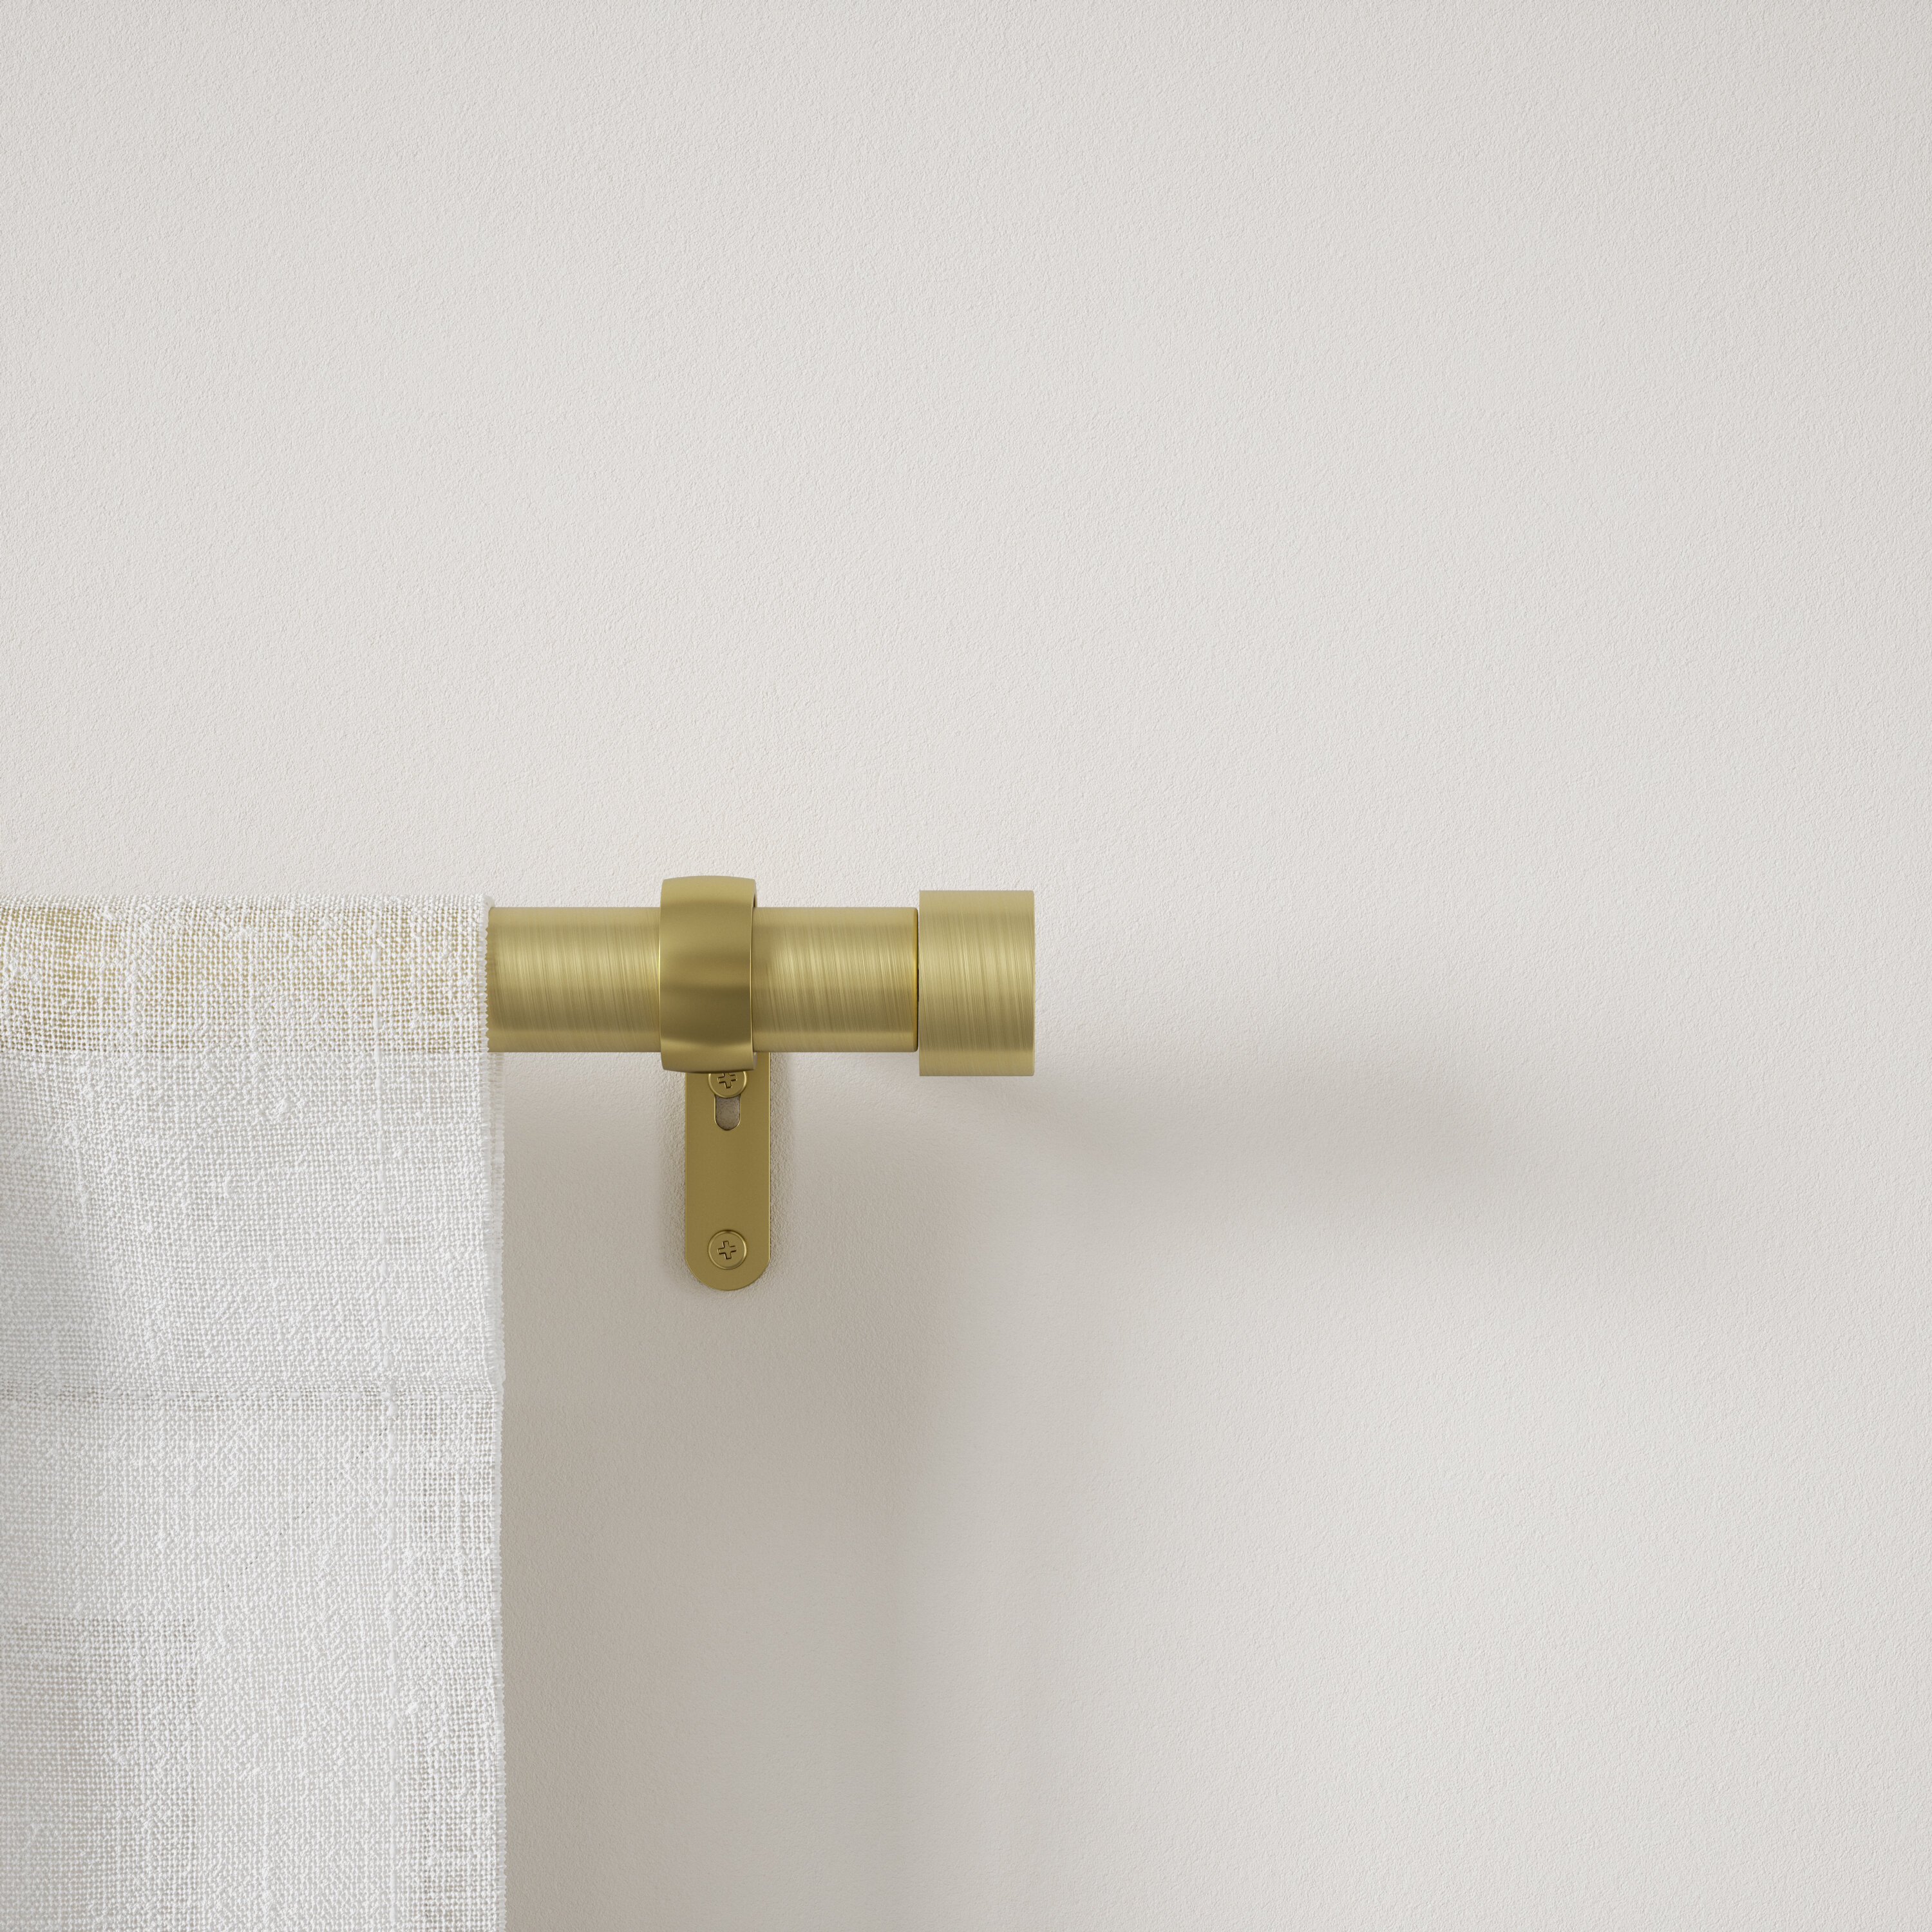 Adjustable Curtain Rod Brackets: Boosting Your Curtain Styling